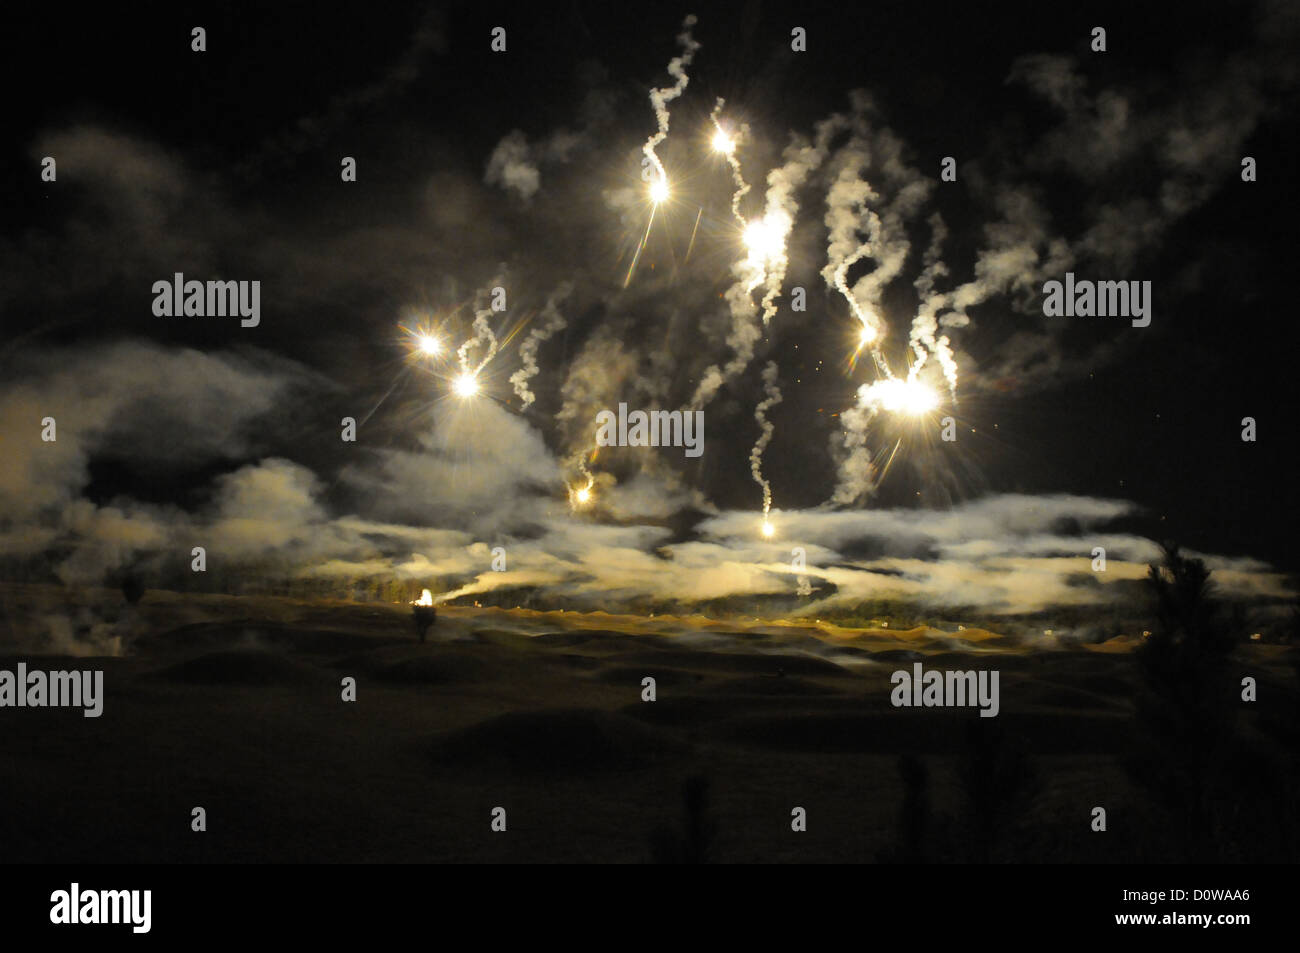 US Army soldiers watch flares light up the night sky during training October 1, 2012 at Fort Lee, Virginia. Stock Photo